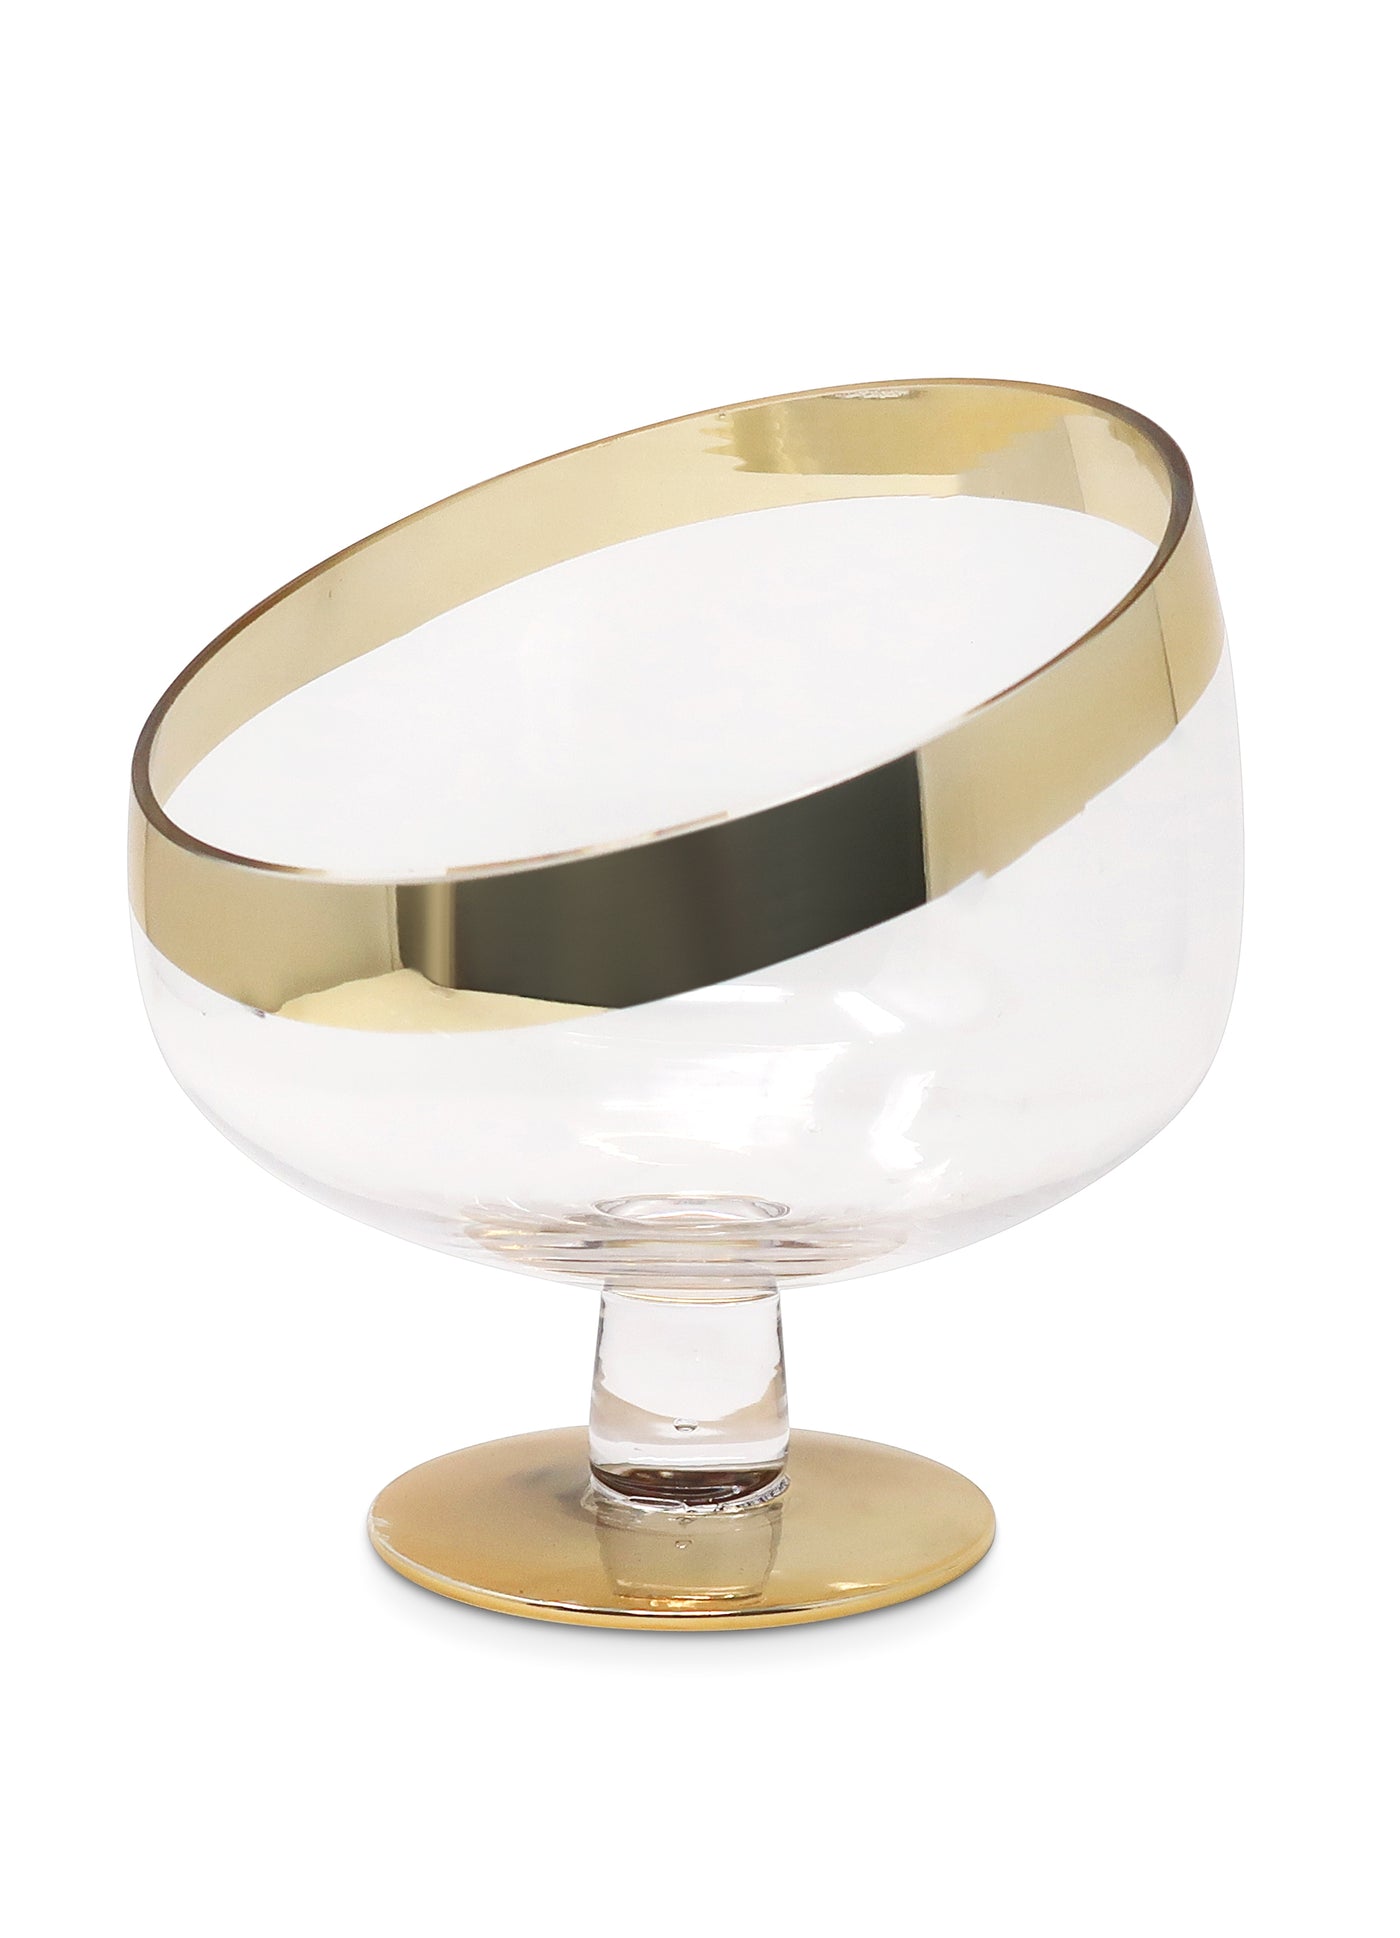 Footed Snack Bowl with Gold Base and Rim (2 Sizes)